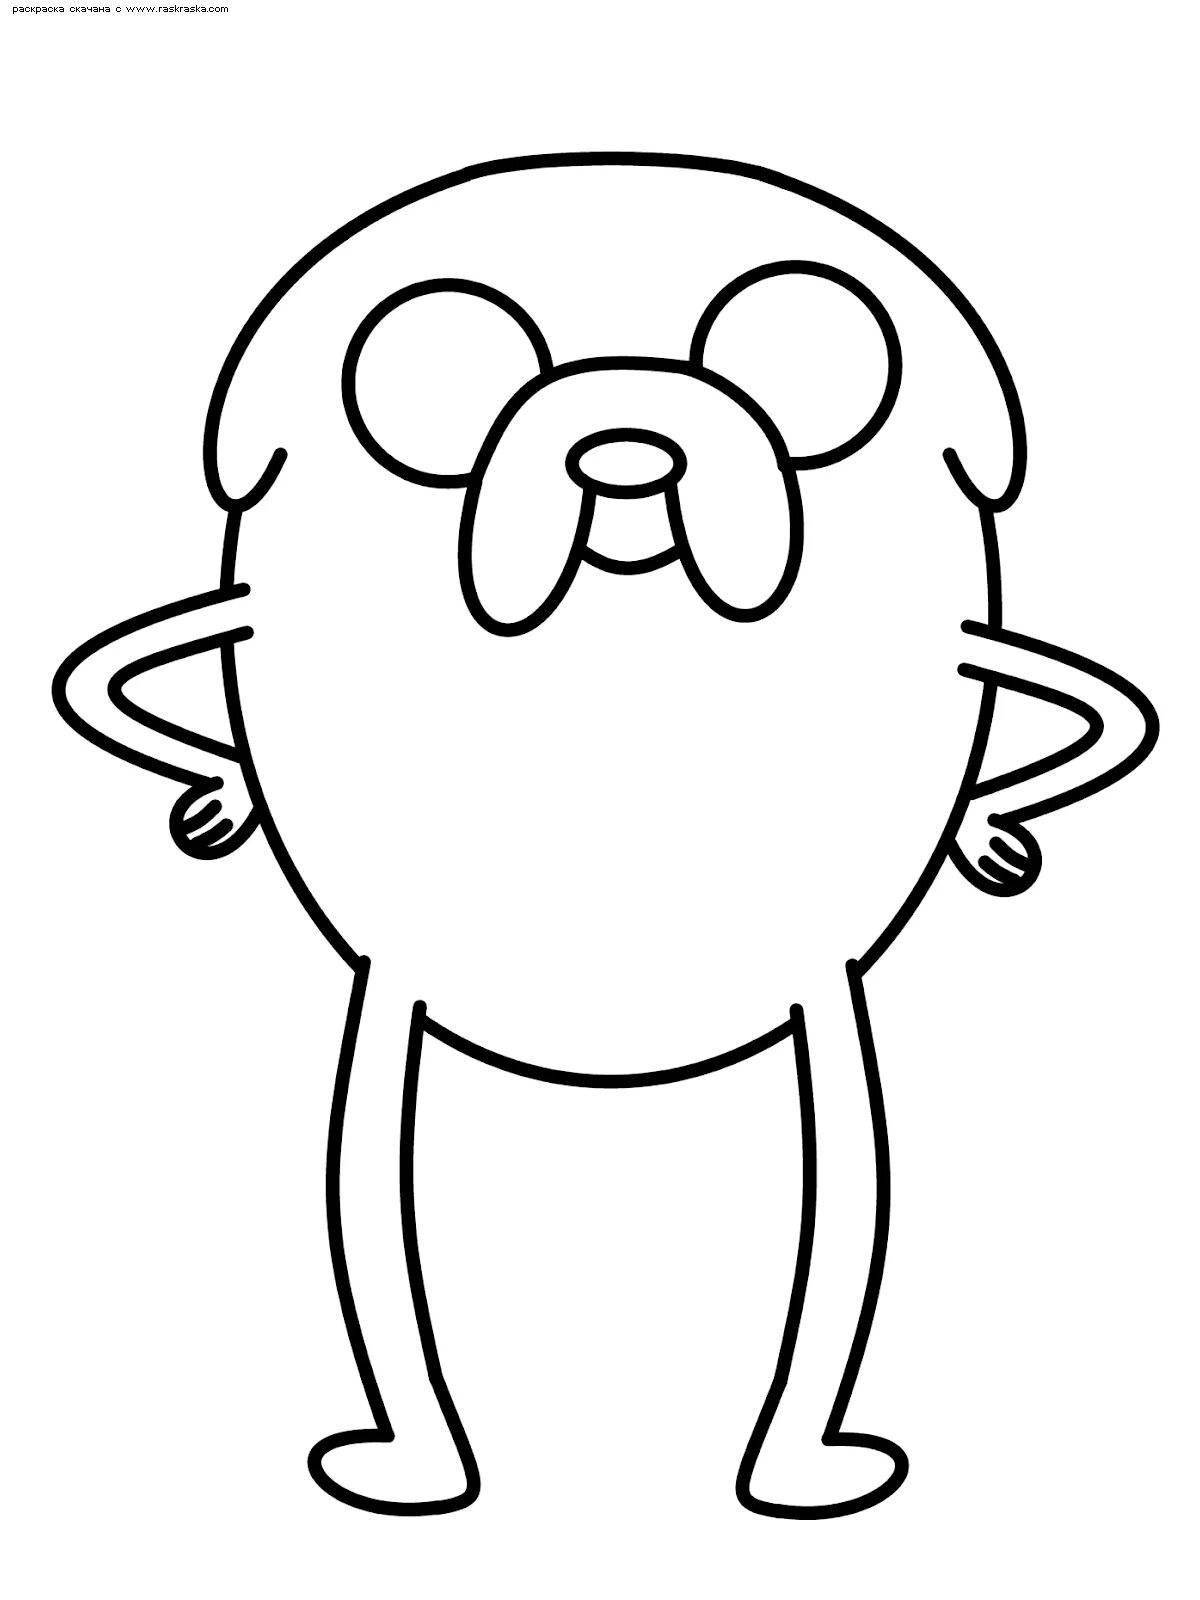 Coloring book adventure time jake